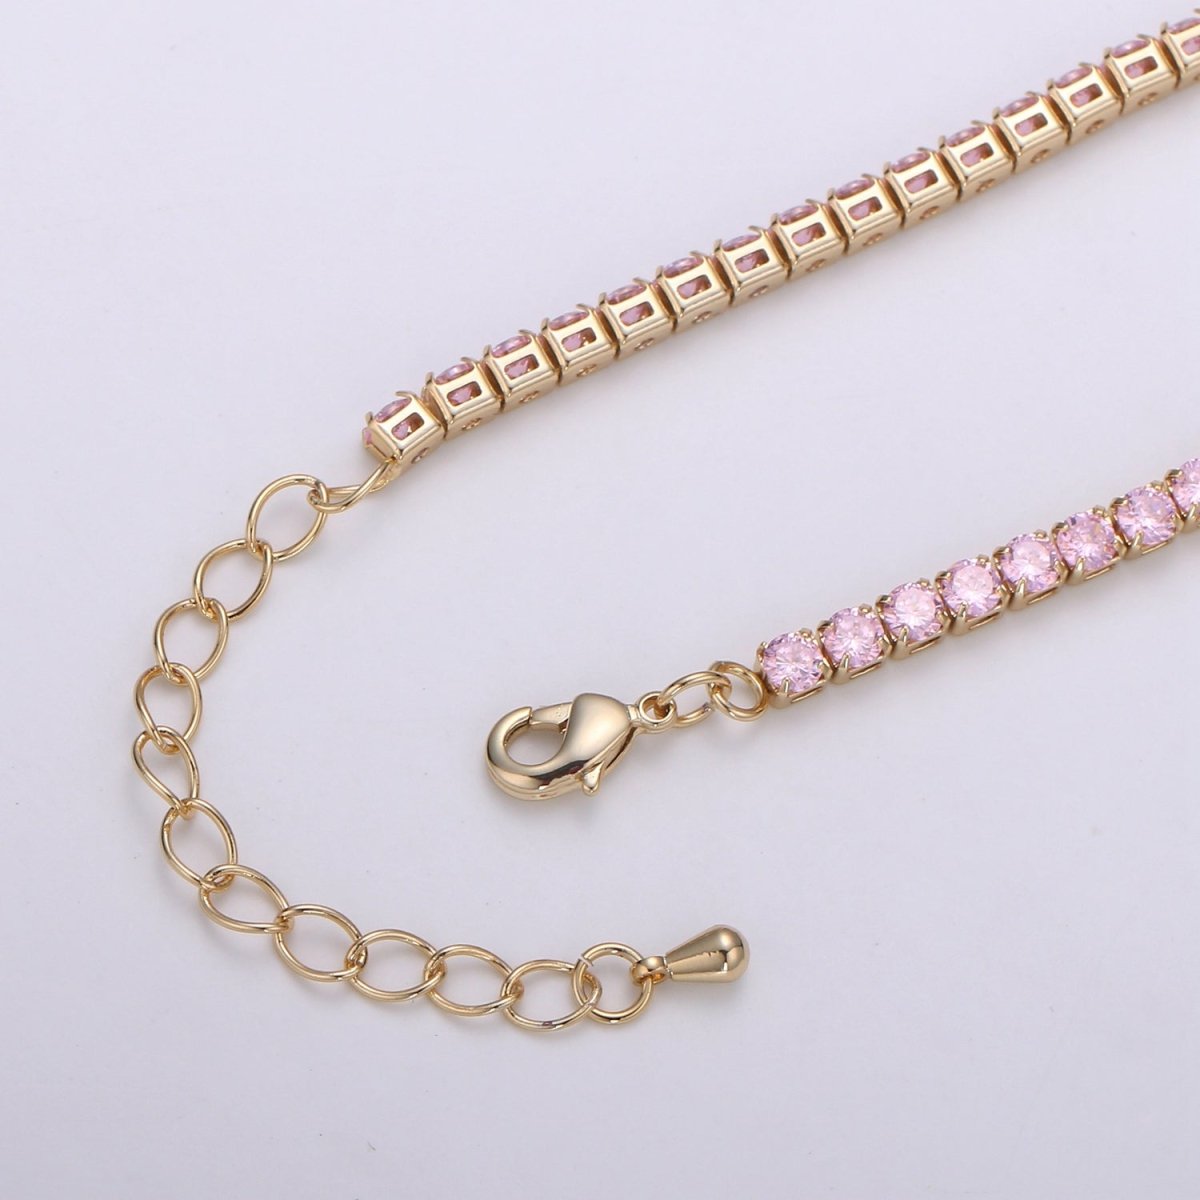 24K Gold Filled Zirconia CZ Tennis Choker, 14.6 Inches with 2 inch Extender, 3mm In Width | CN-927, CN-928 Clearance Pricing - DLUXCA